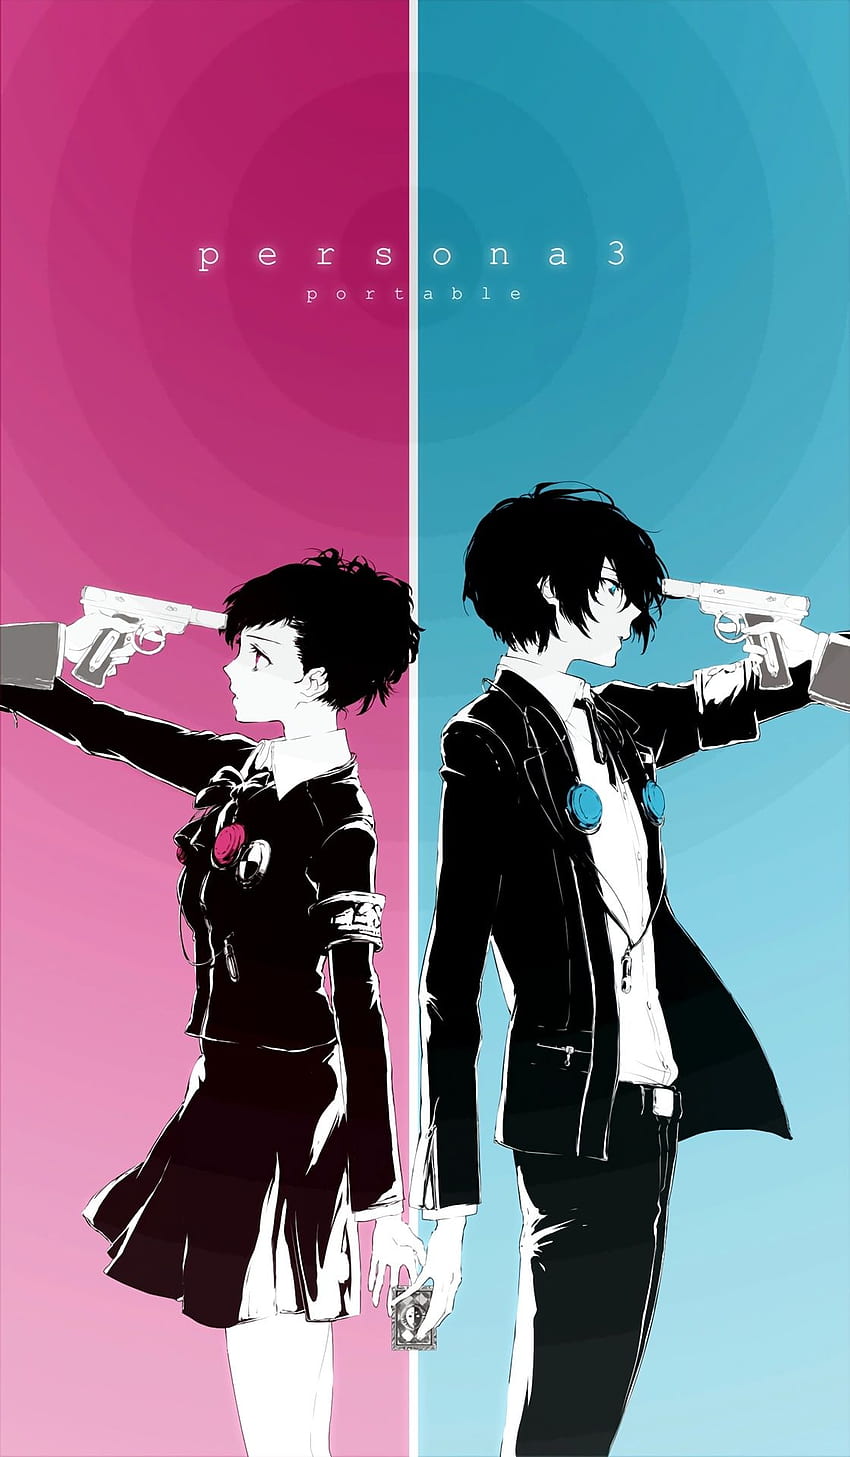 Persona Iphone wallpaper by Gothic489 on DeviantArt